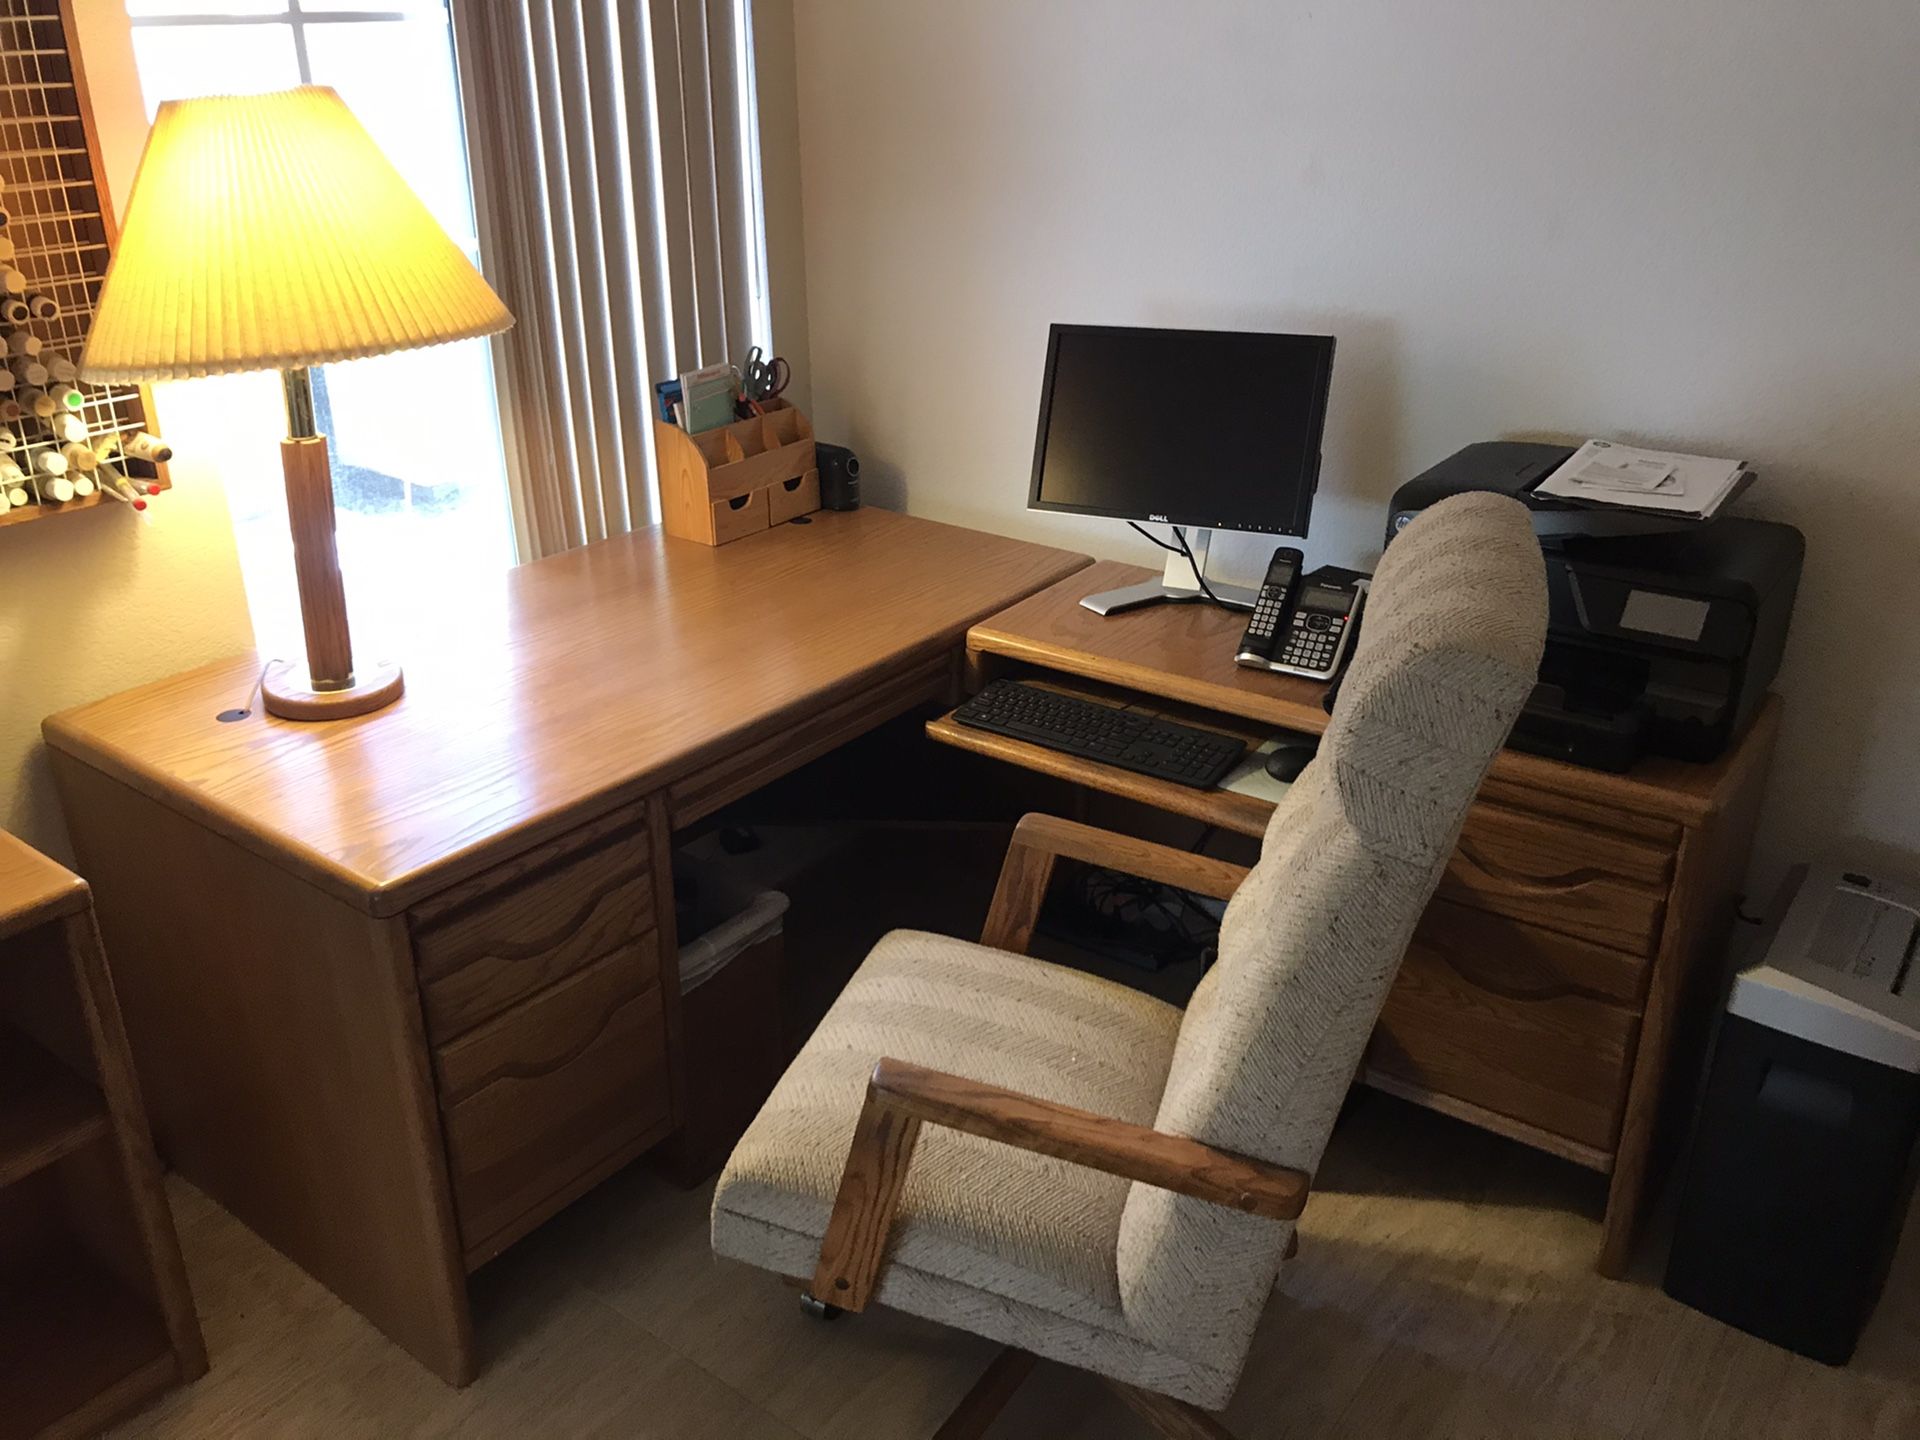 Office furniture complete. Desk, return desk, file cabinet, bookshelf and chair. All included.